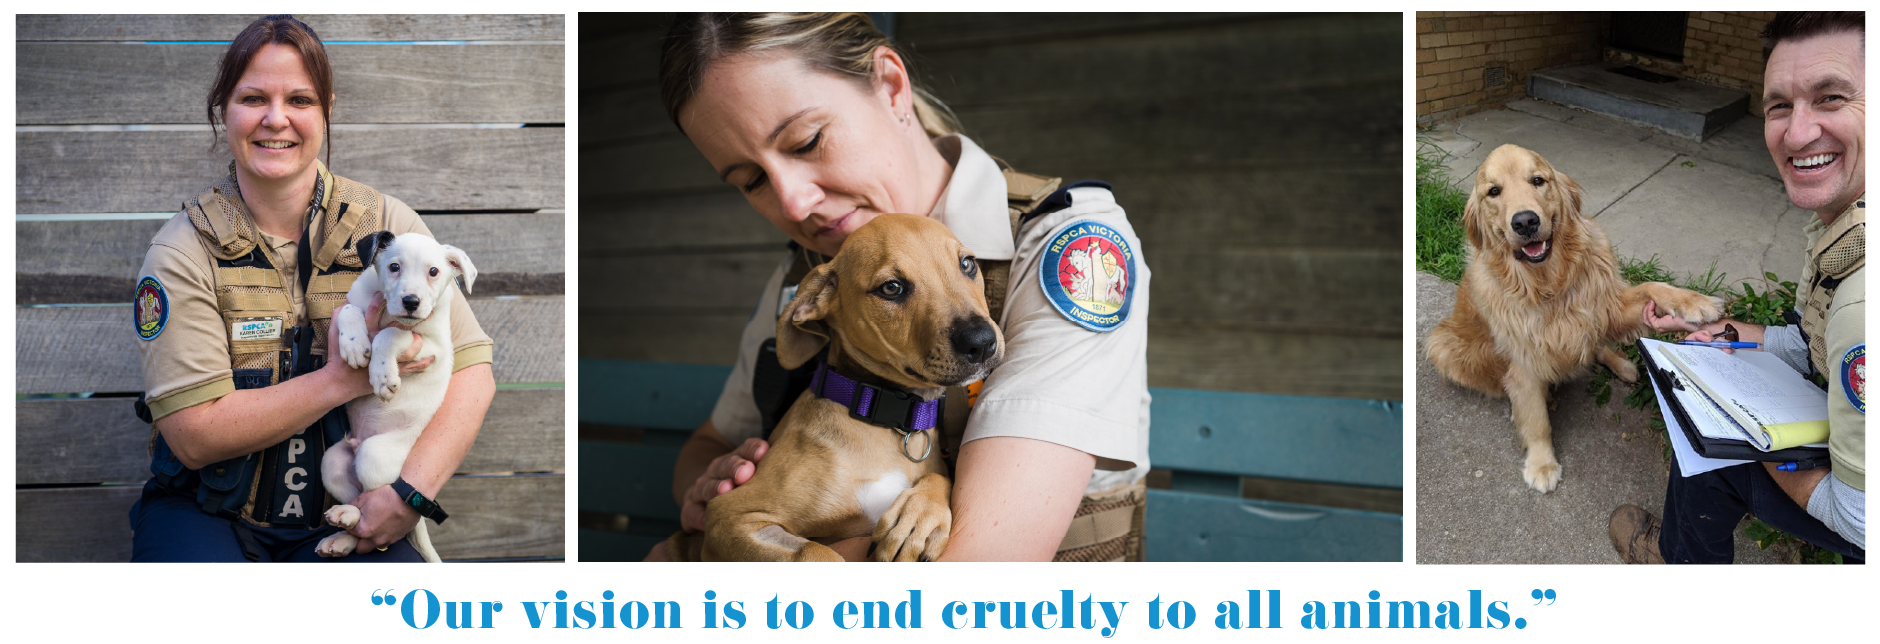 "Our vision is to end cruelty to all animals."